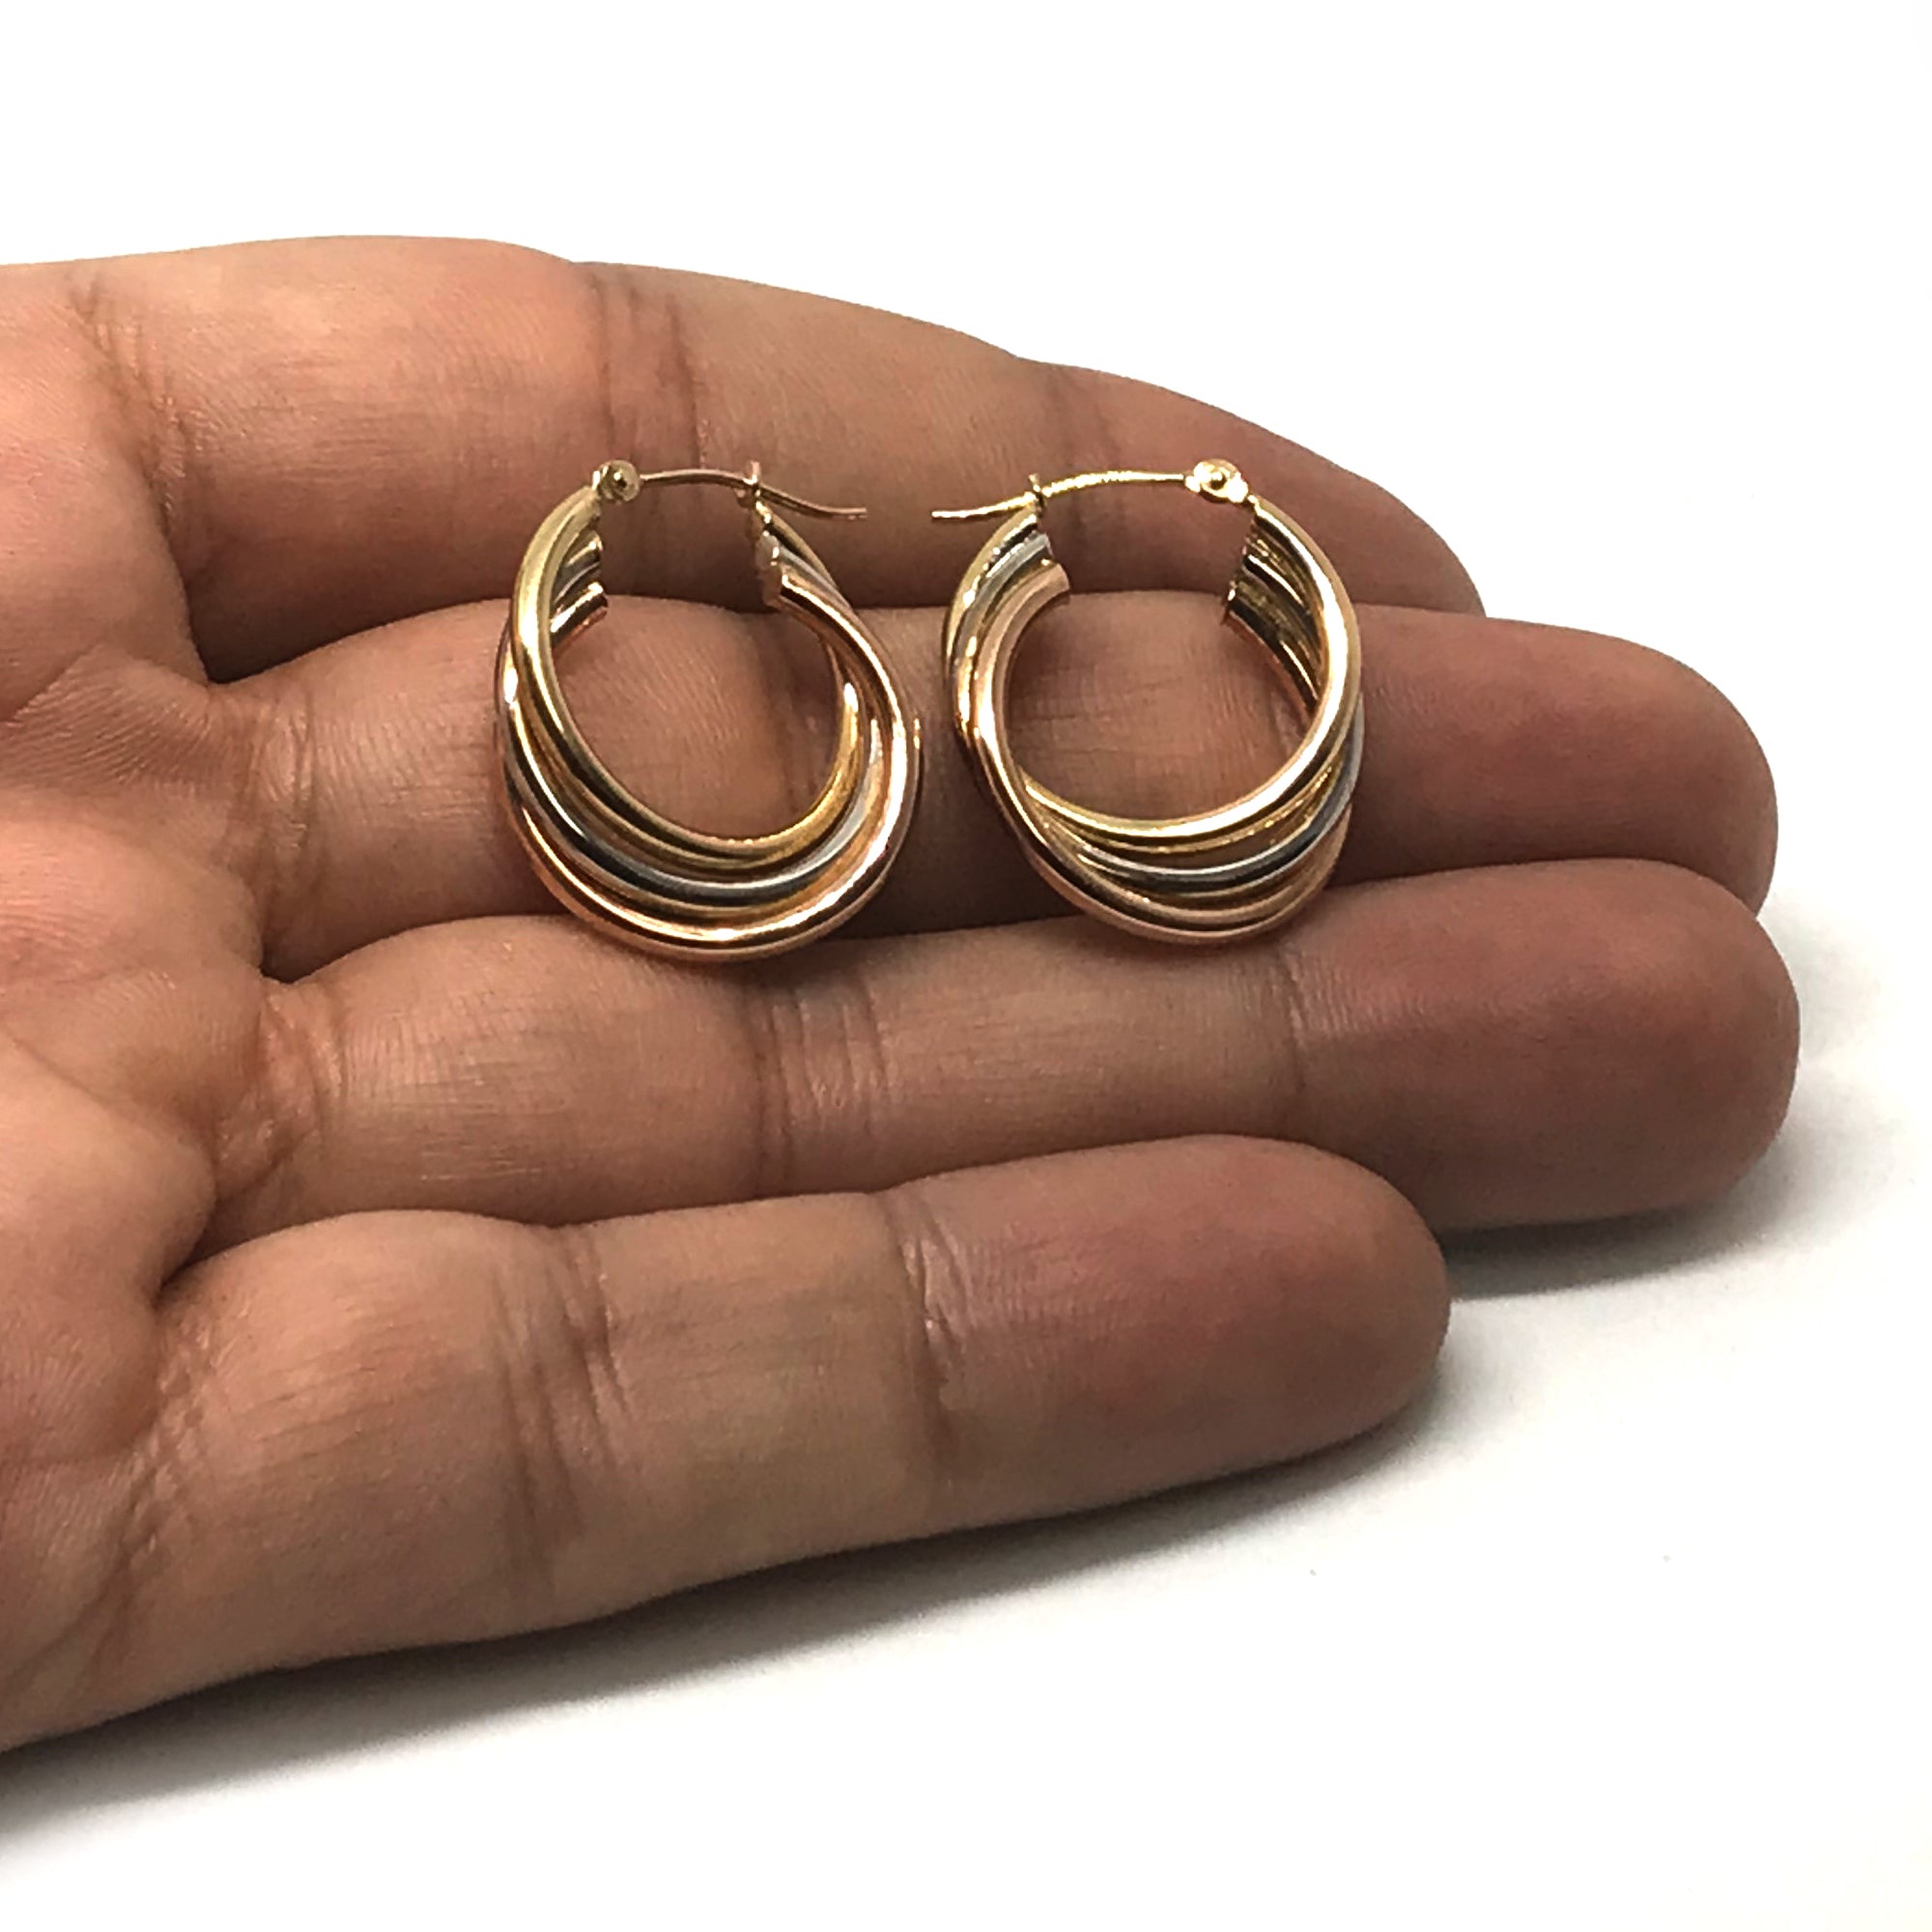 14K Yellow And White Rose Gold Triple Row Hoop Earrings